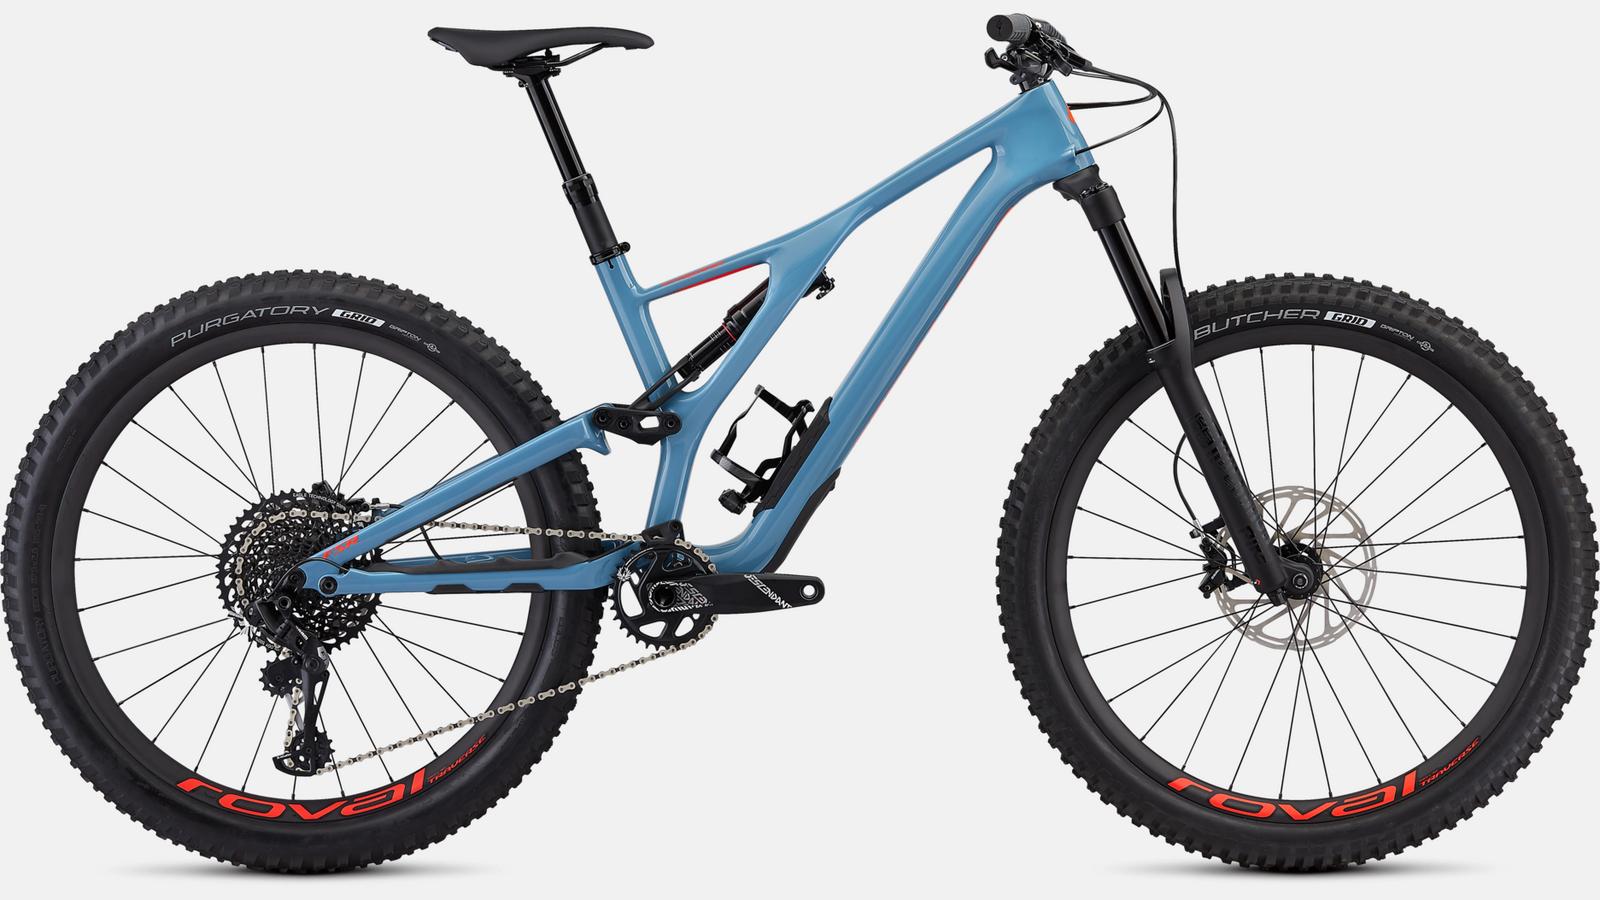 Paint for 2018 Specialized Men's Stumpjumper Expert 27.5 - Gloss Storm Grey